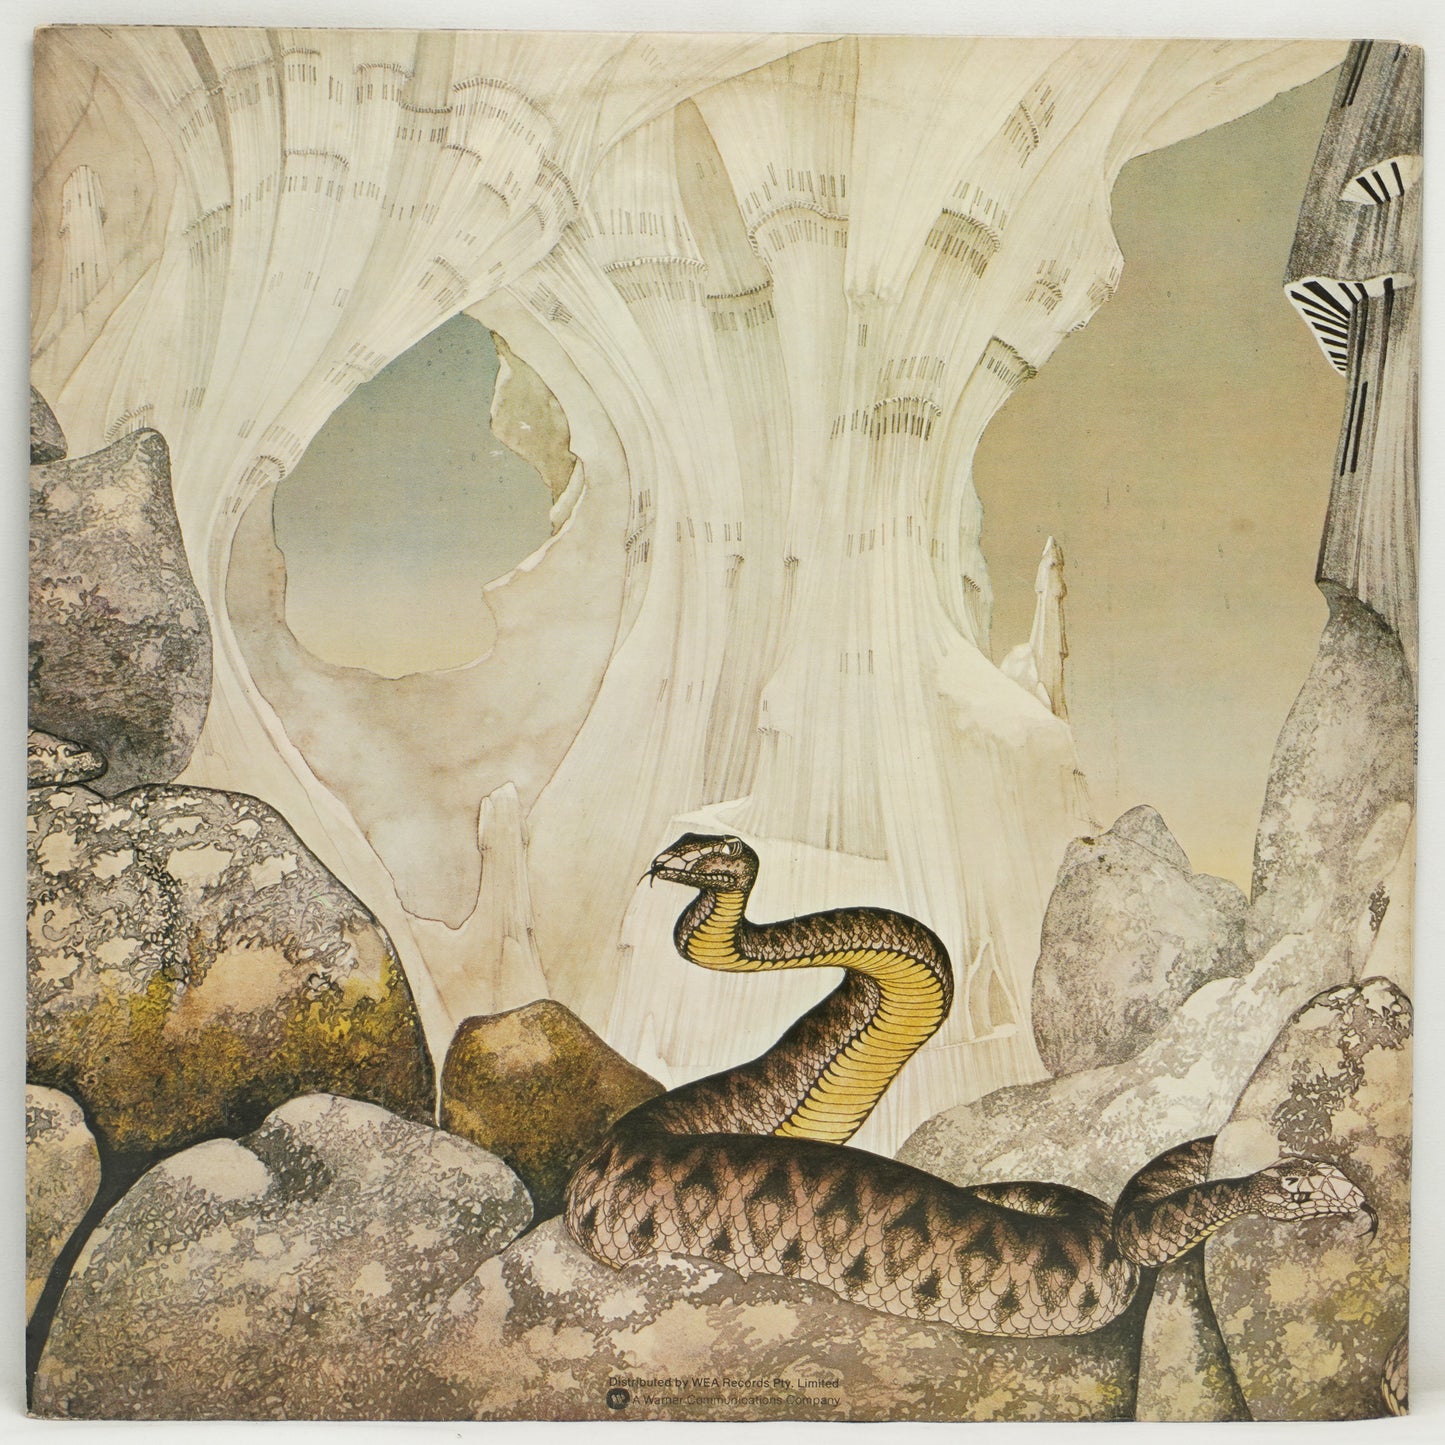 Yes – Relayer